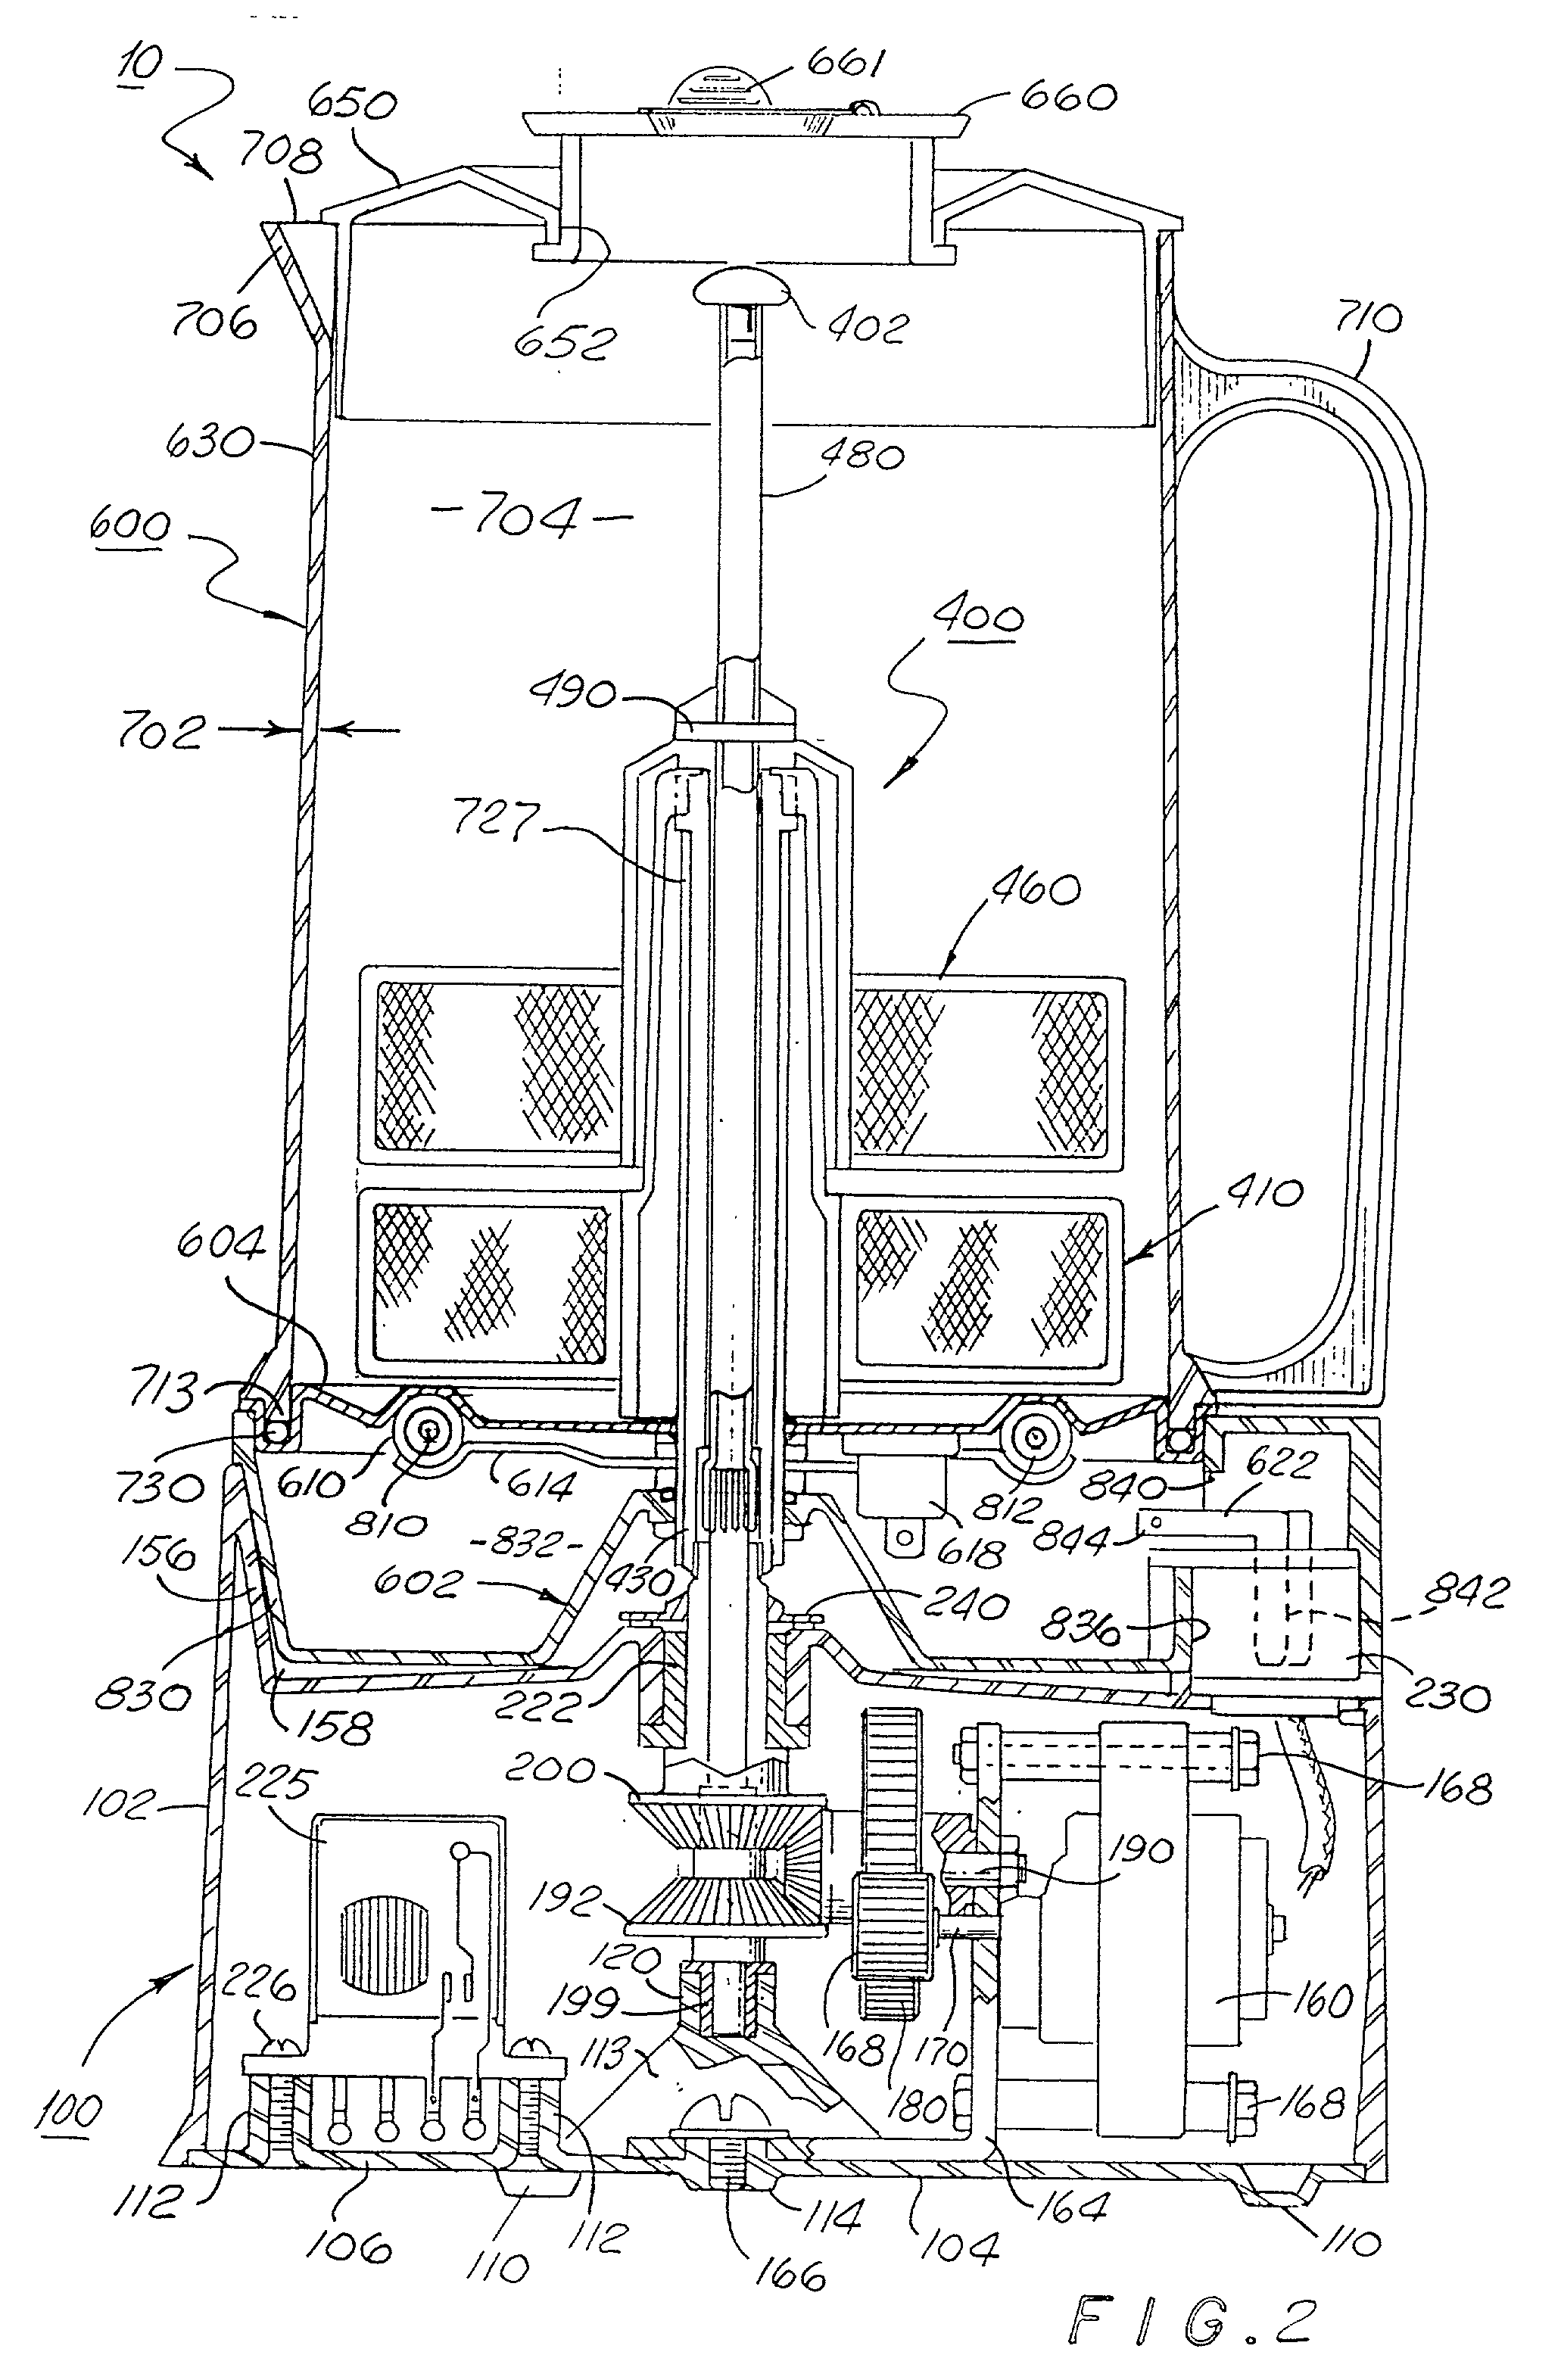 Method and apparatus to automatically heat and froth milk for beverages